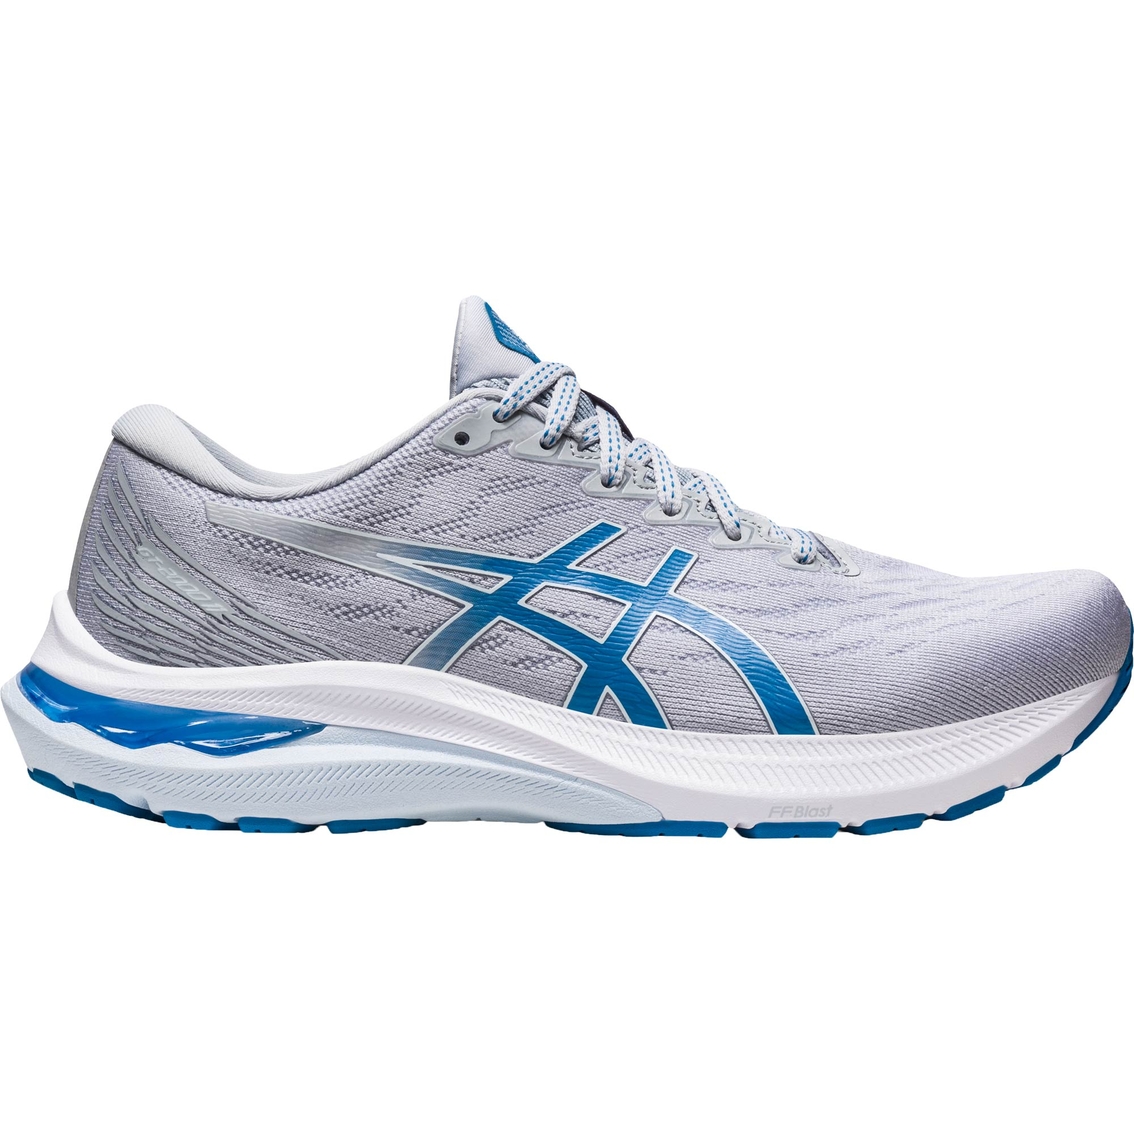 ASICS Women's GT-2000 11 Running Shoes - Image 2 of 6